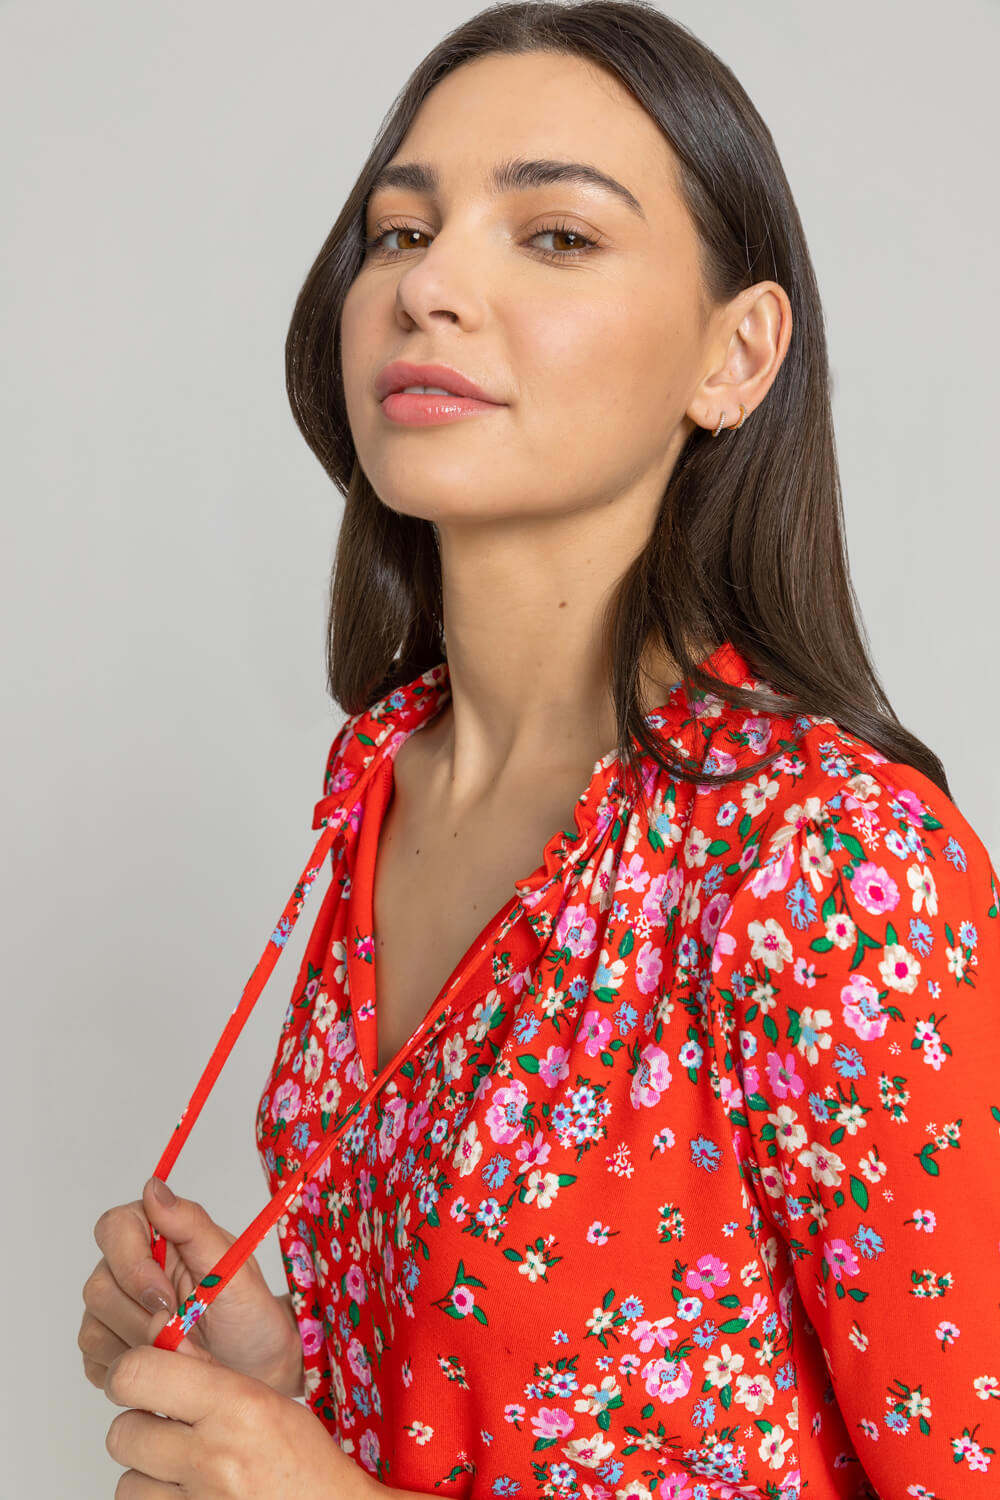 Red Floral Tie Neck Detail Top, Image 4 of 4